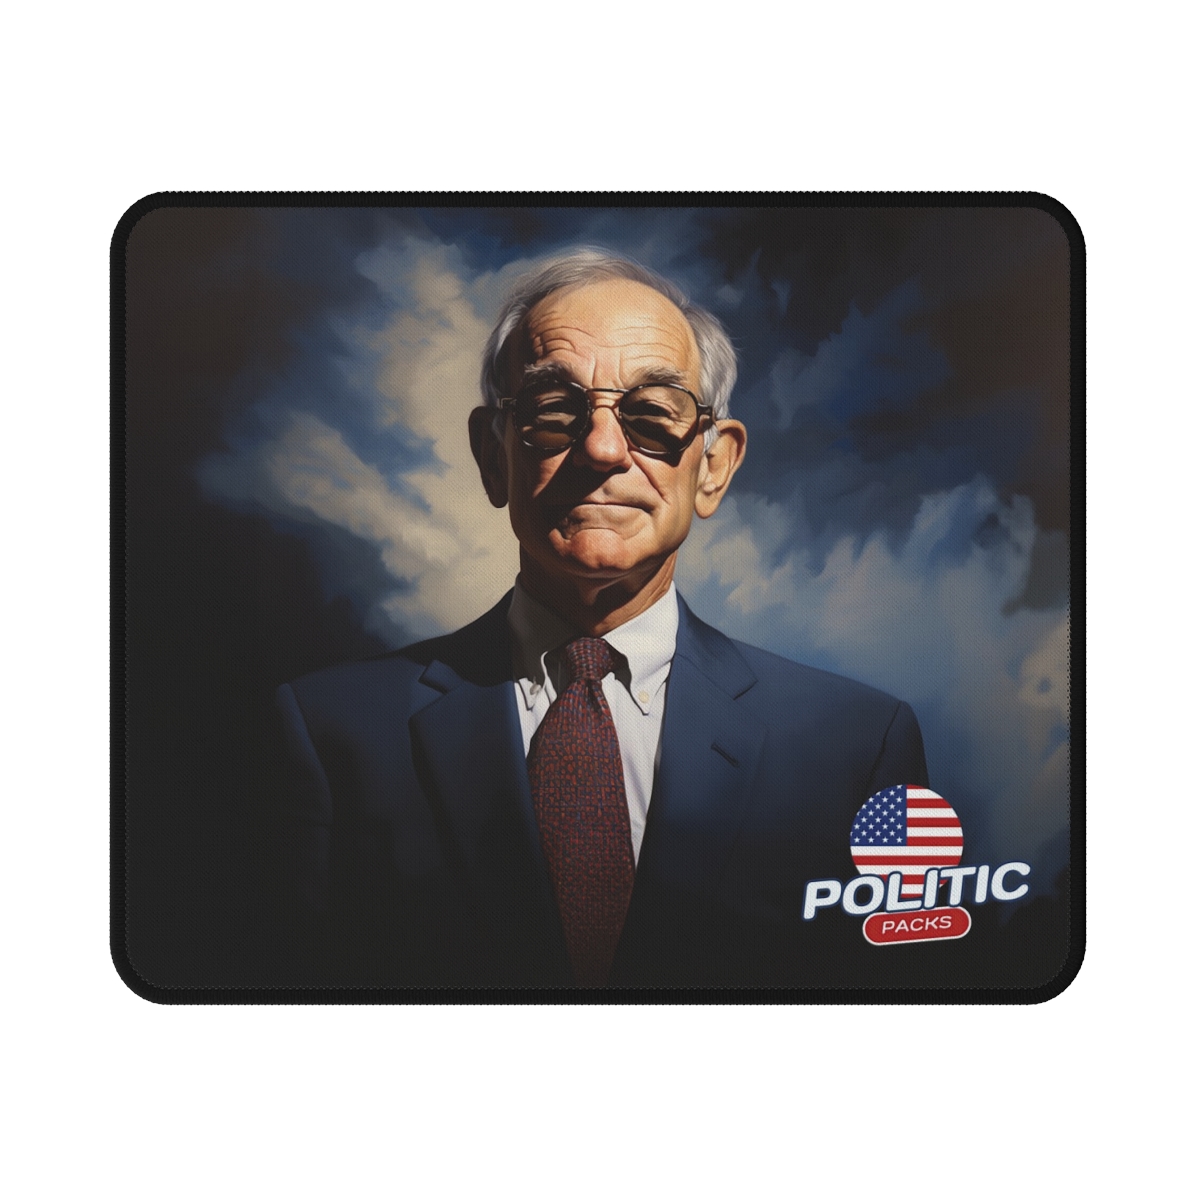 Ron Paul Legacy Mouse Pad – Politic Packs Edition